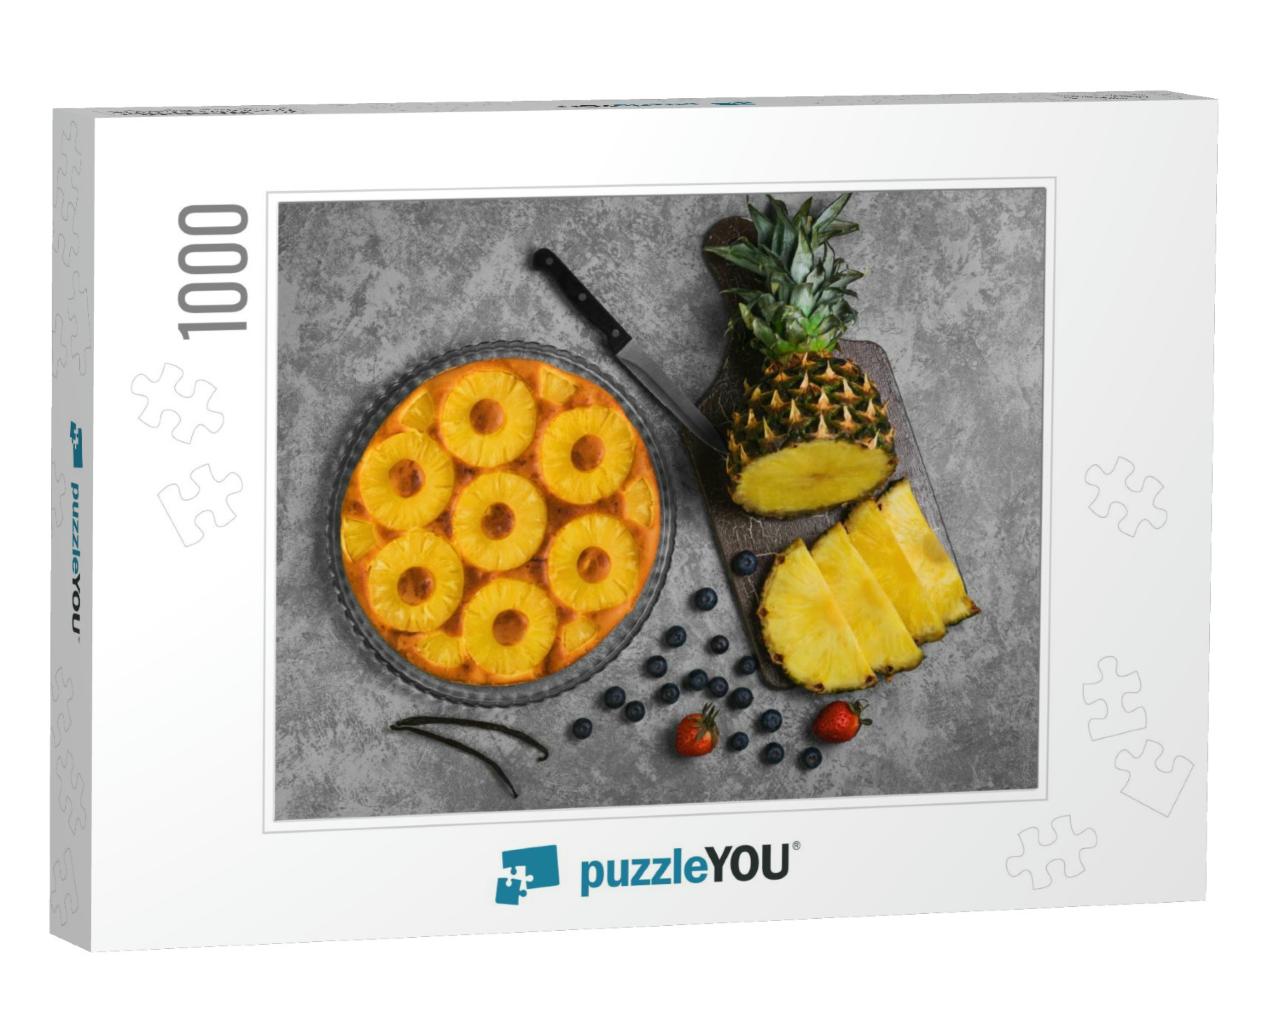 Homemade Fruit Pineapple Pie Cake. Ingredients for Pineap... Jigsaw Puzzle with 1000 pieces